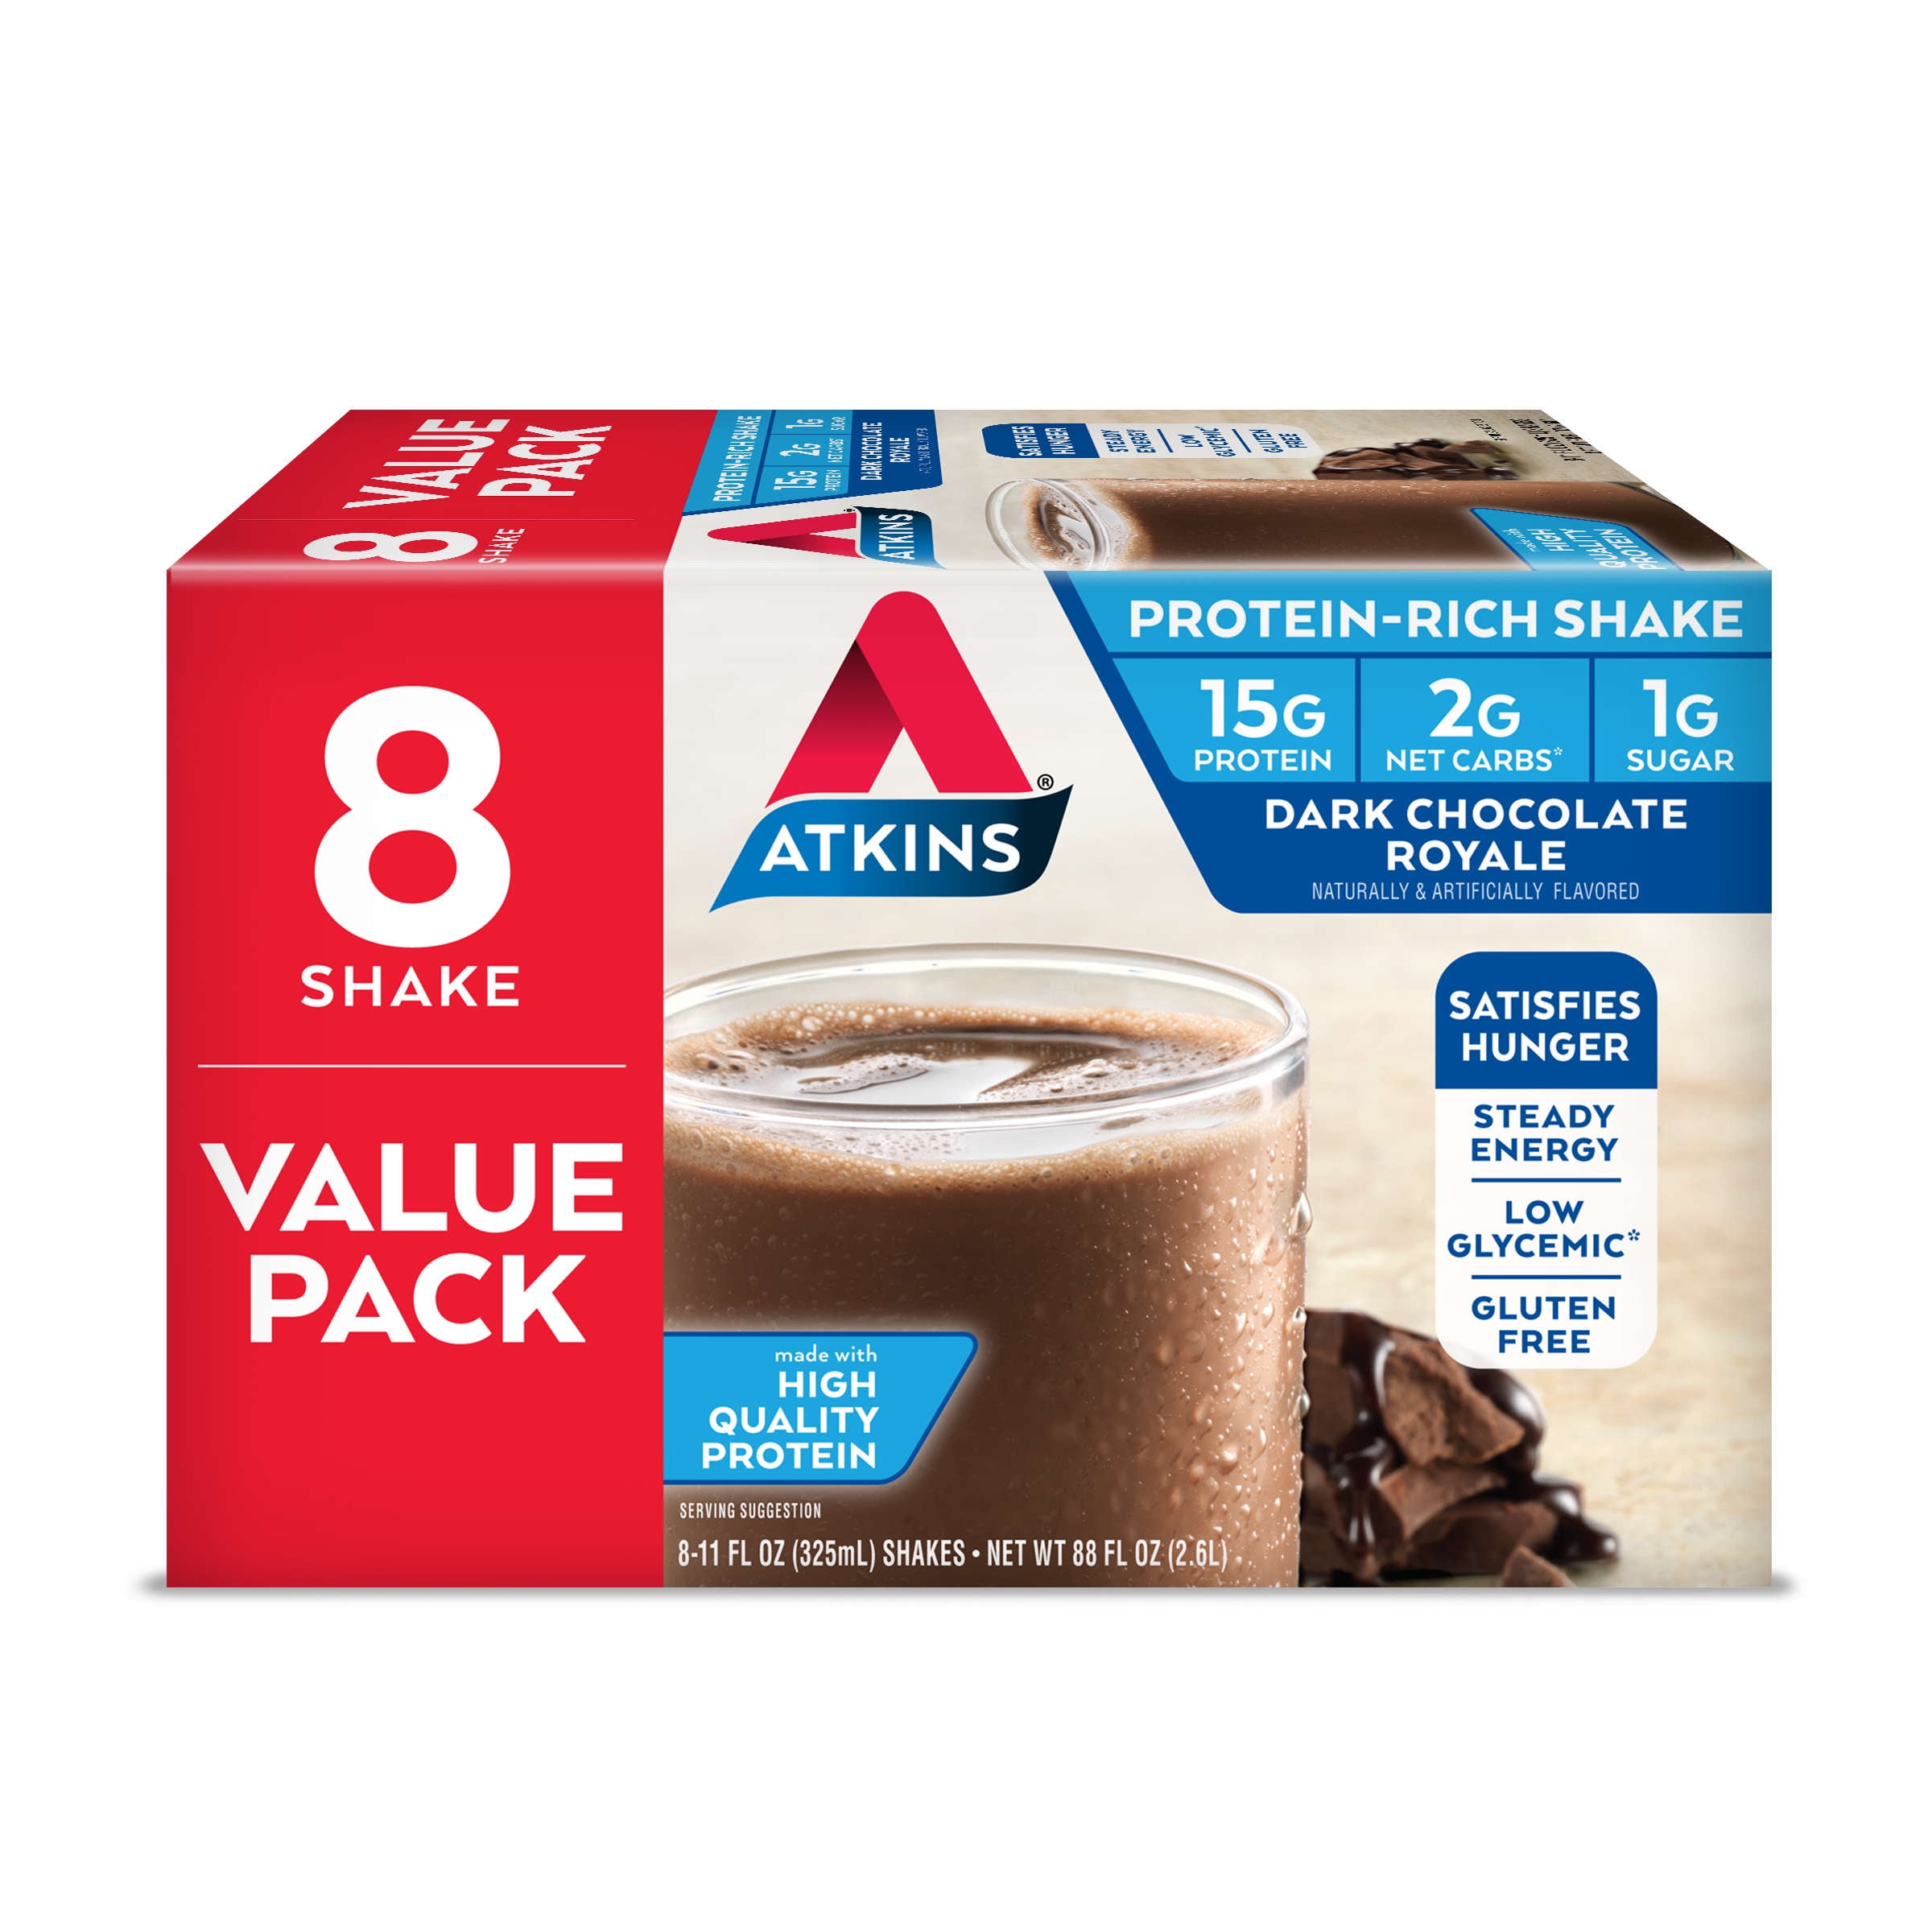 Photo 1 of Atkins Gluten Free Protein-Rich Shake, Dark Chocolate Royale, Keto Friendly, 8 Count (Ready to Drink)
exp 07/14/2022